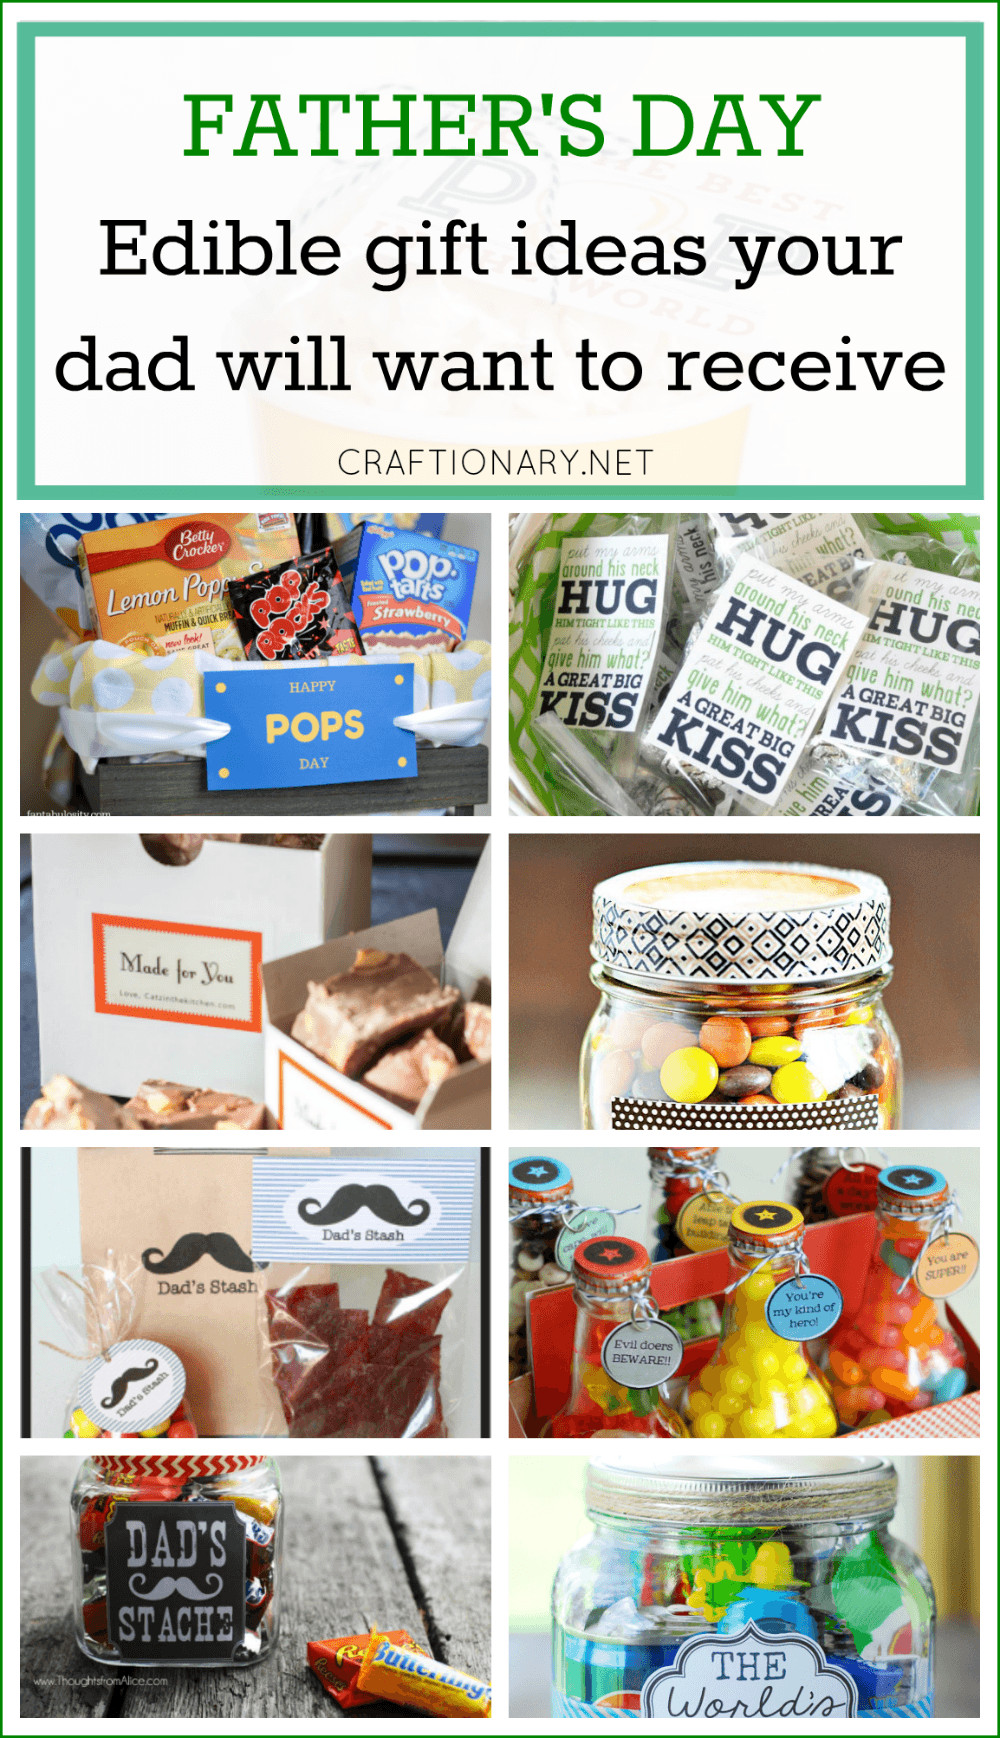 Crafty Father'S Day Gift Ideas
 Craftionary